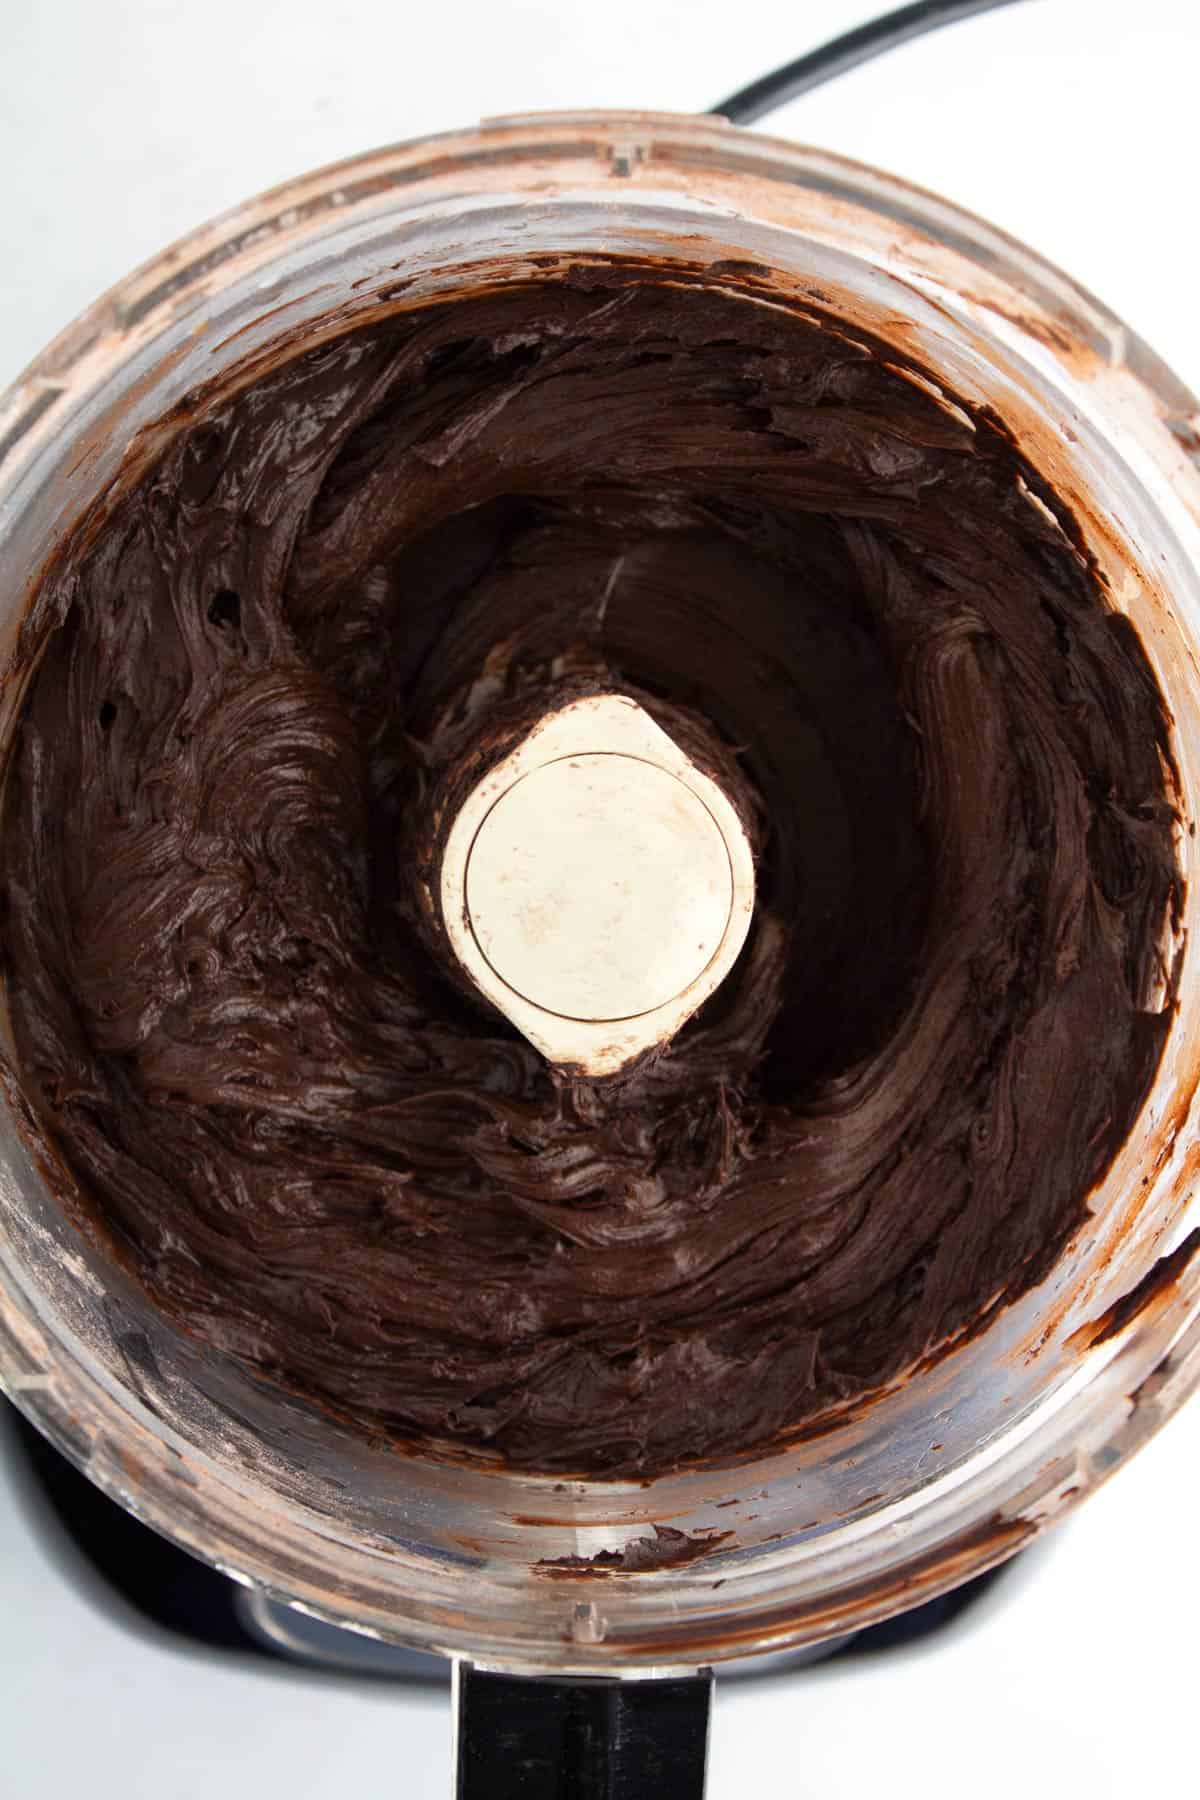 Chocolate frosting in a food processor after combining with corn syrup.